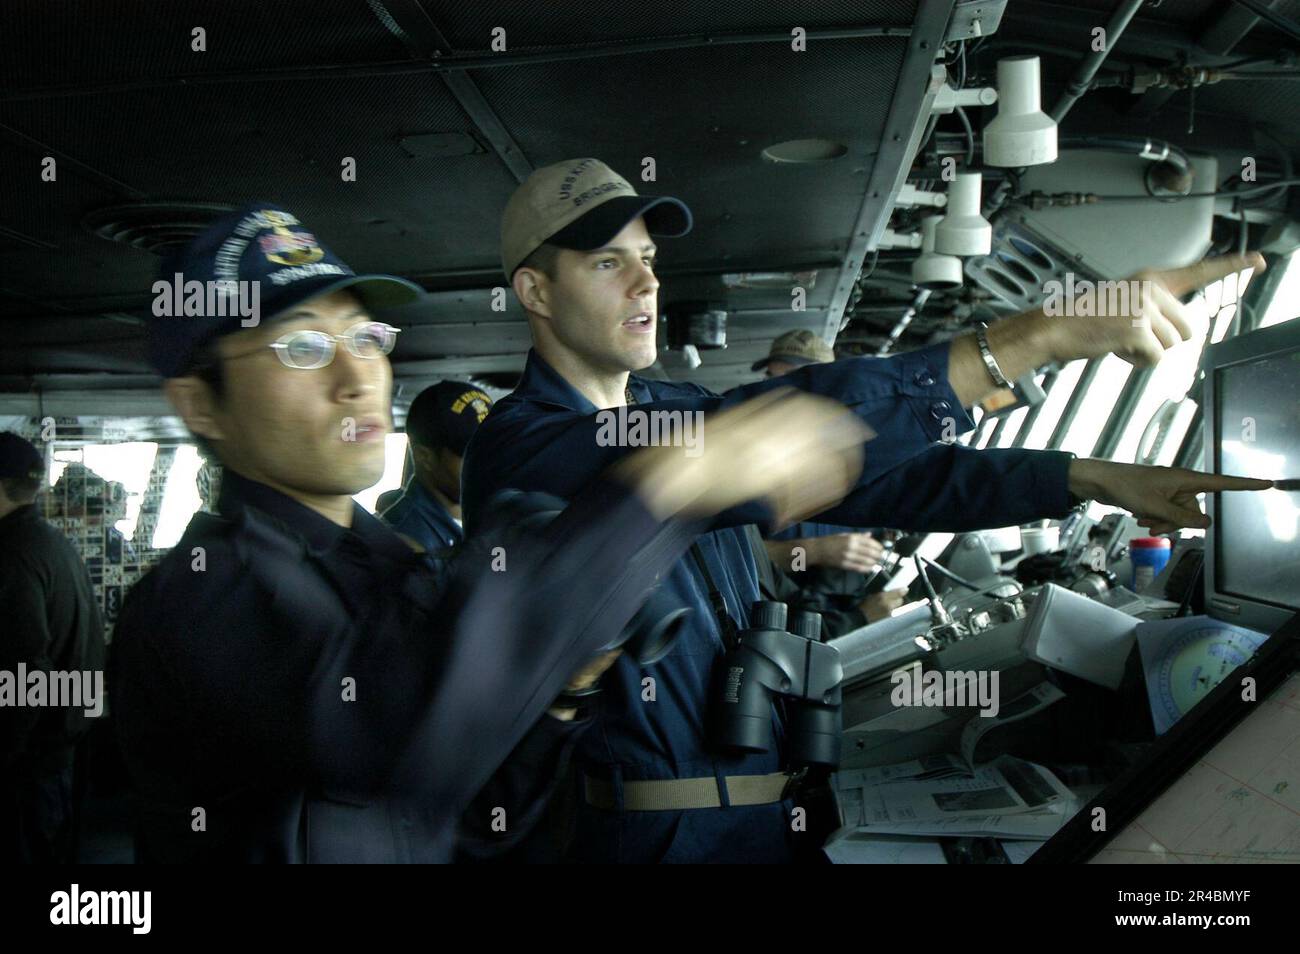 US Navy  U.S. Navy Lt.j.g. right, and Japan Maritime Self-Defense Force (JMSDF) Lt. work together to establish ship alignment during Annual Exercise. Stock Photo